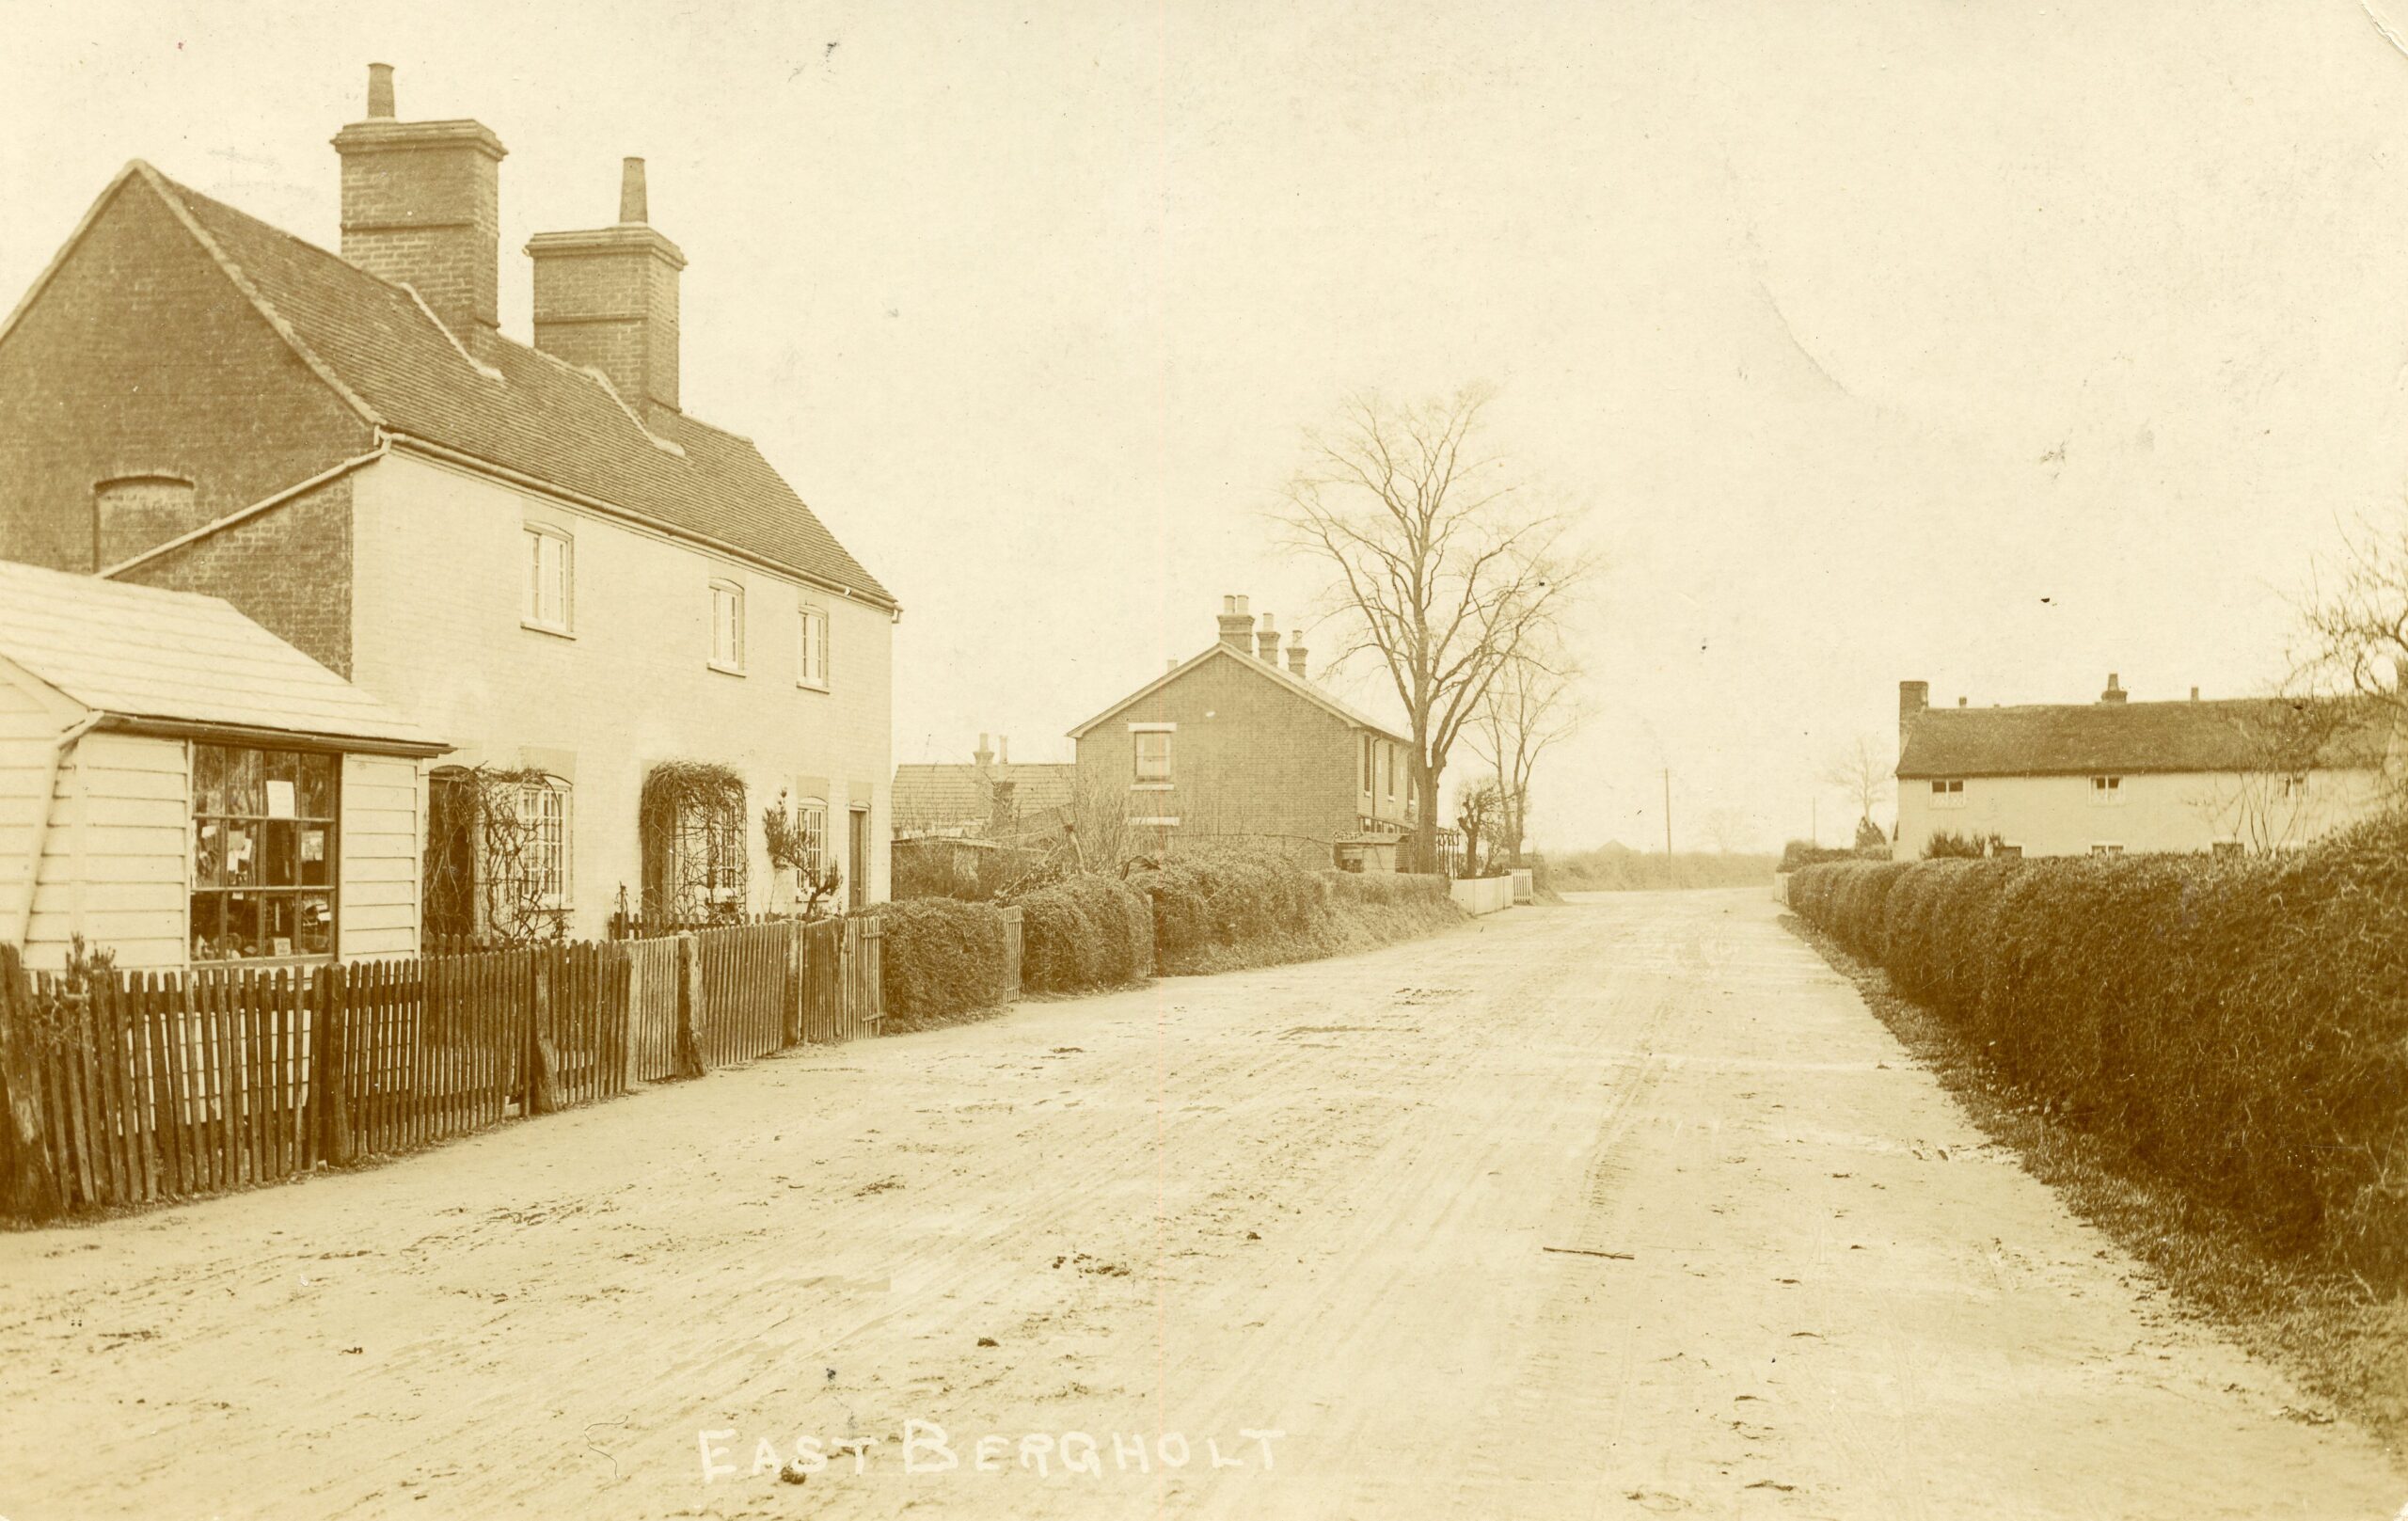 Heath Road, circa 1910.  Victoria Bakery can be seen on the left hand side of the road, in the middle distance.<br>From a Postcard sent in 1911.<br />Author's collection